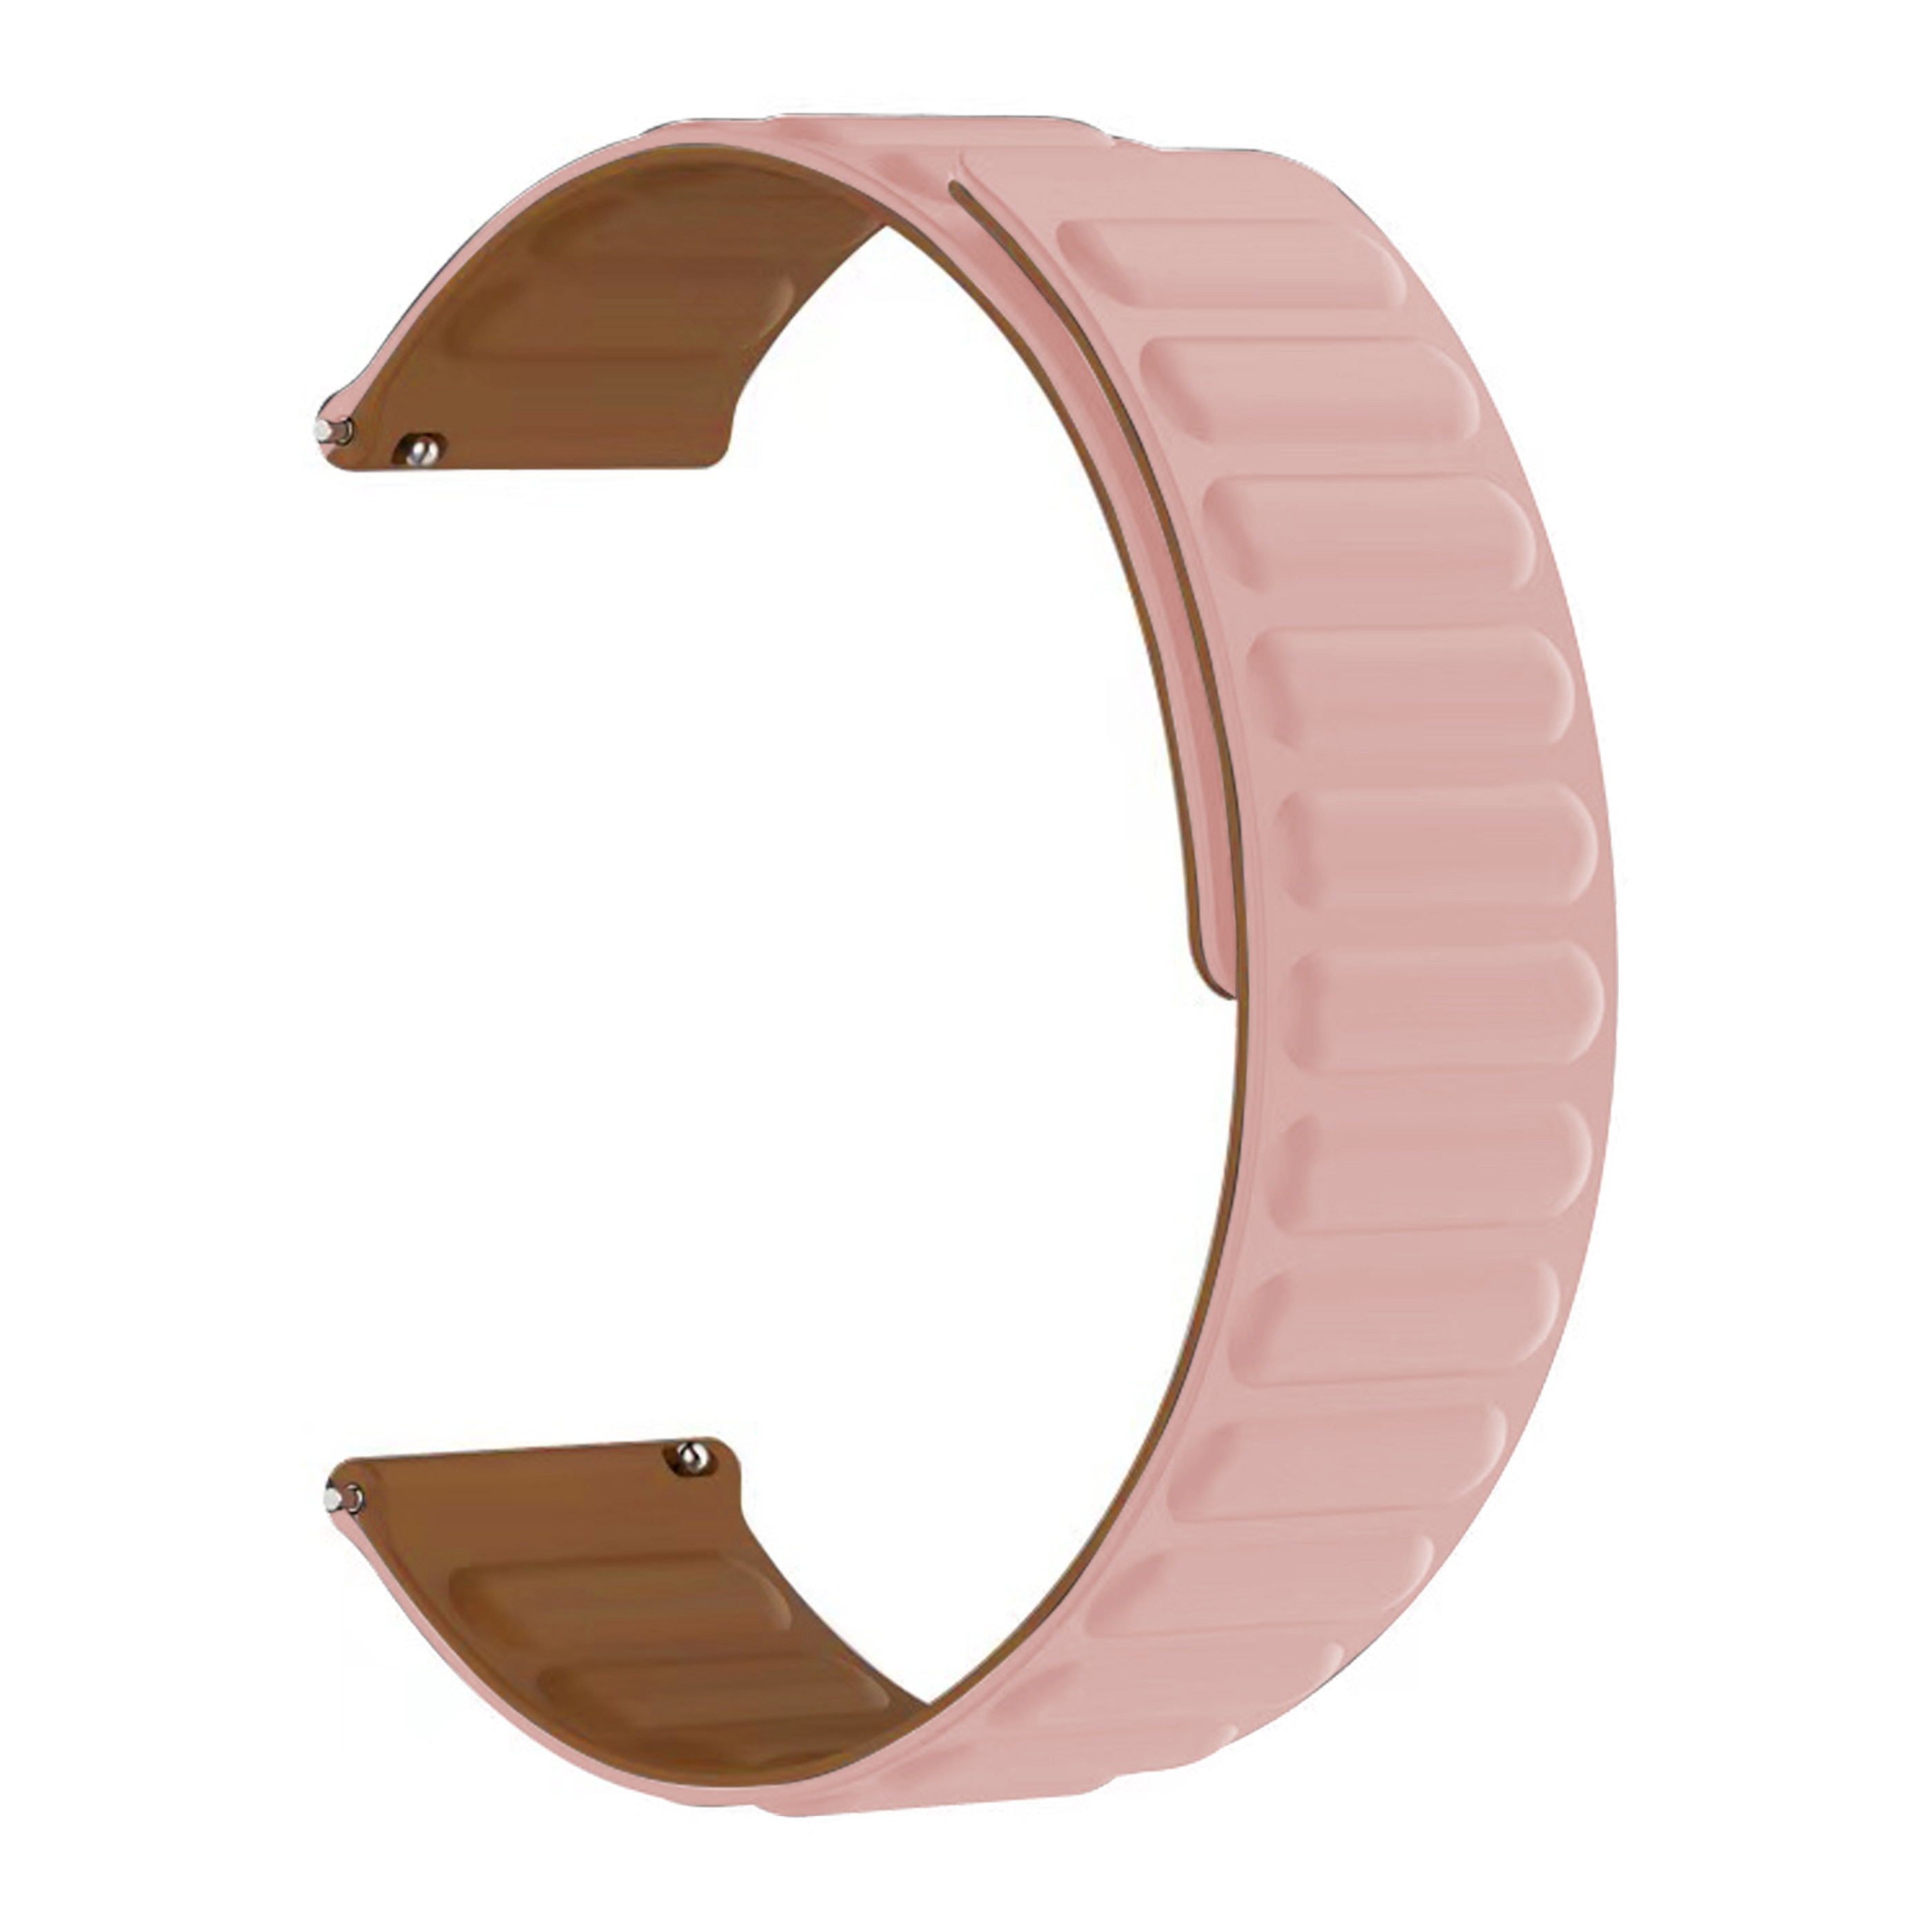 Bracelet magnétique en silicone Samsung Galaxy Watch 4 Classic 42mm, rose